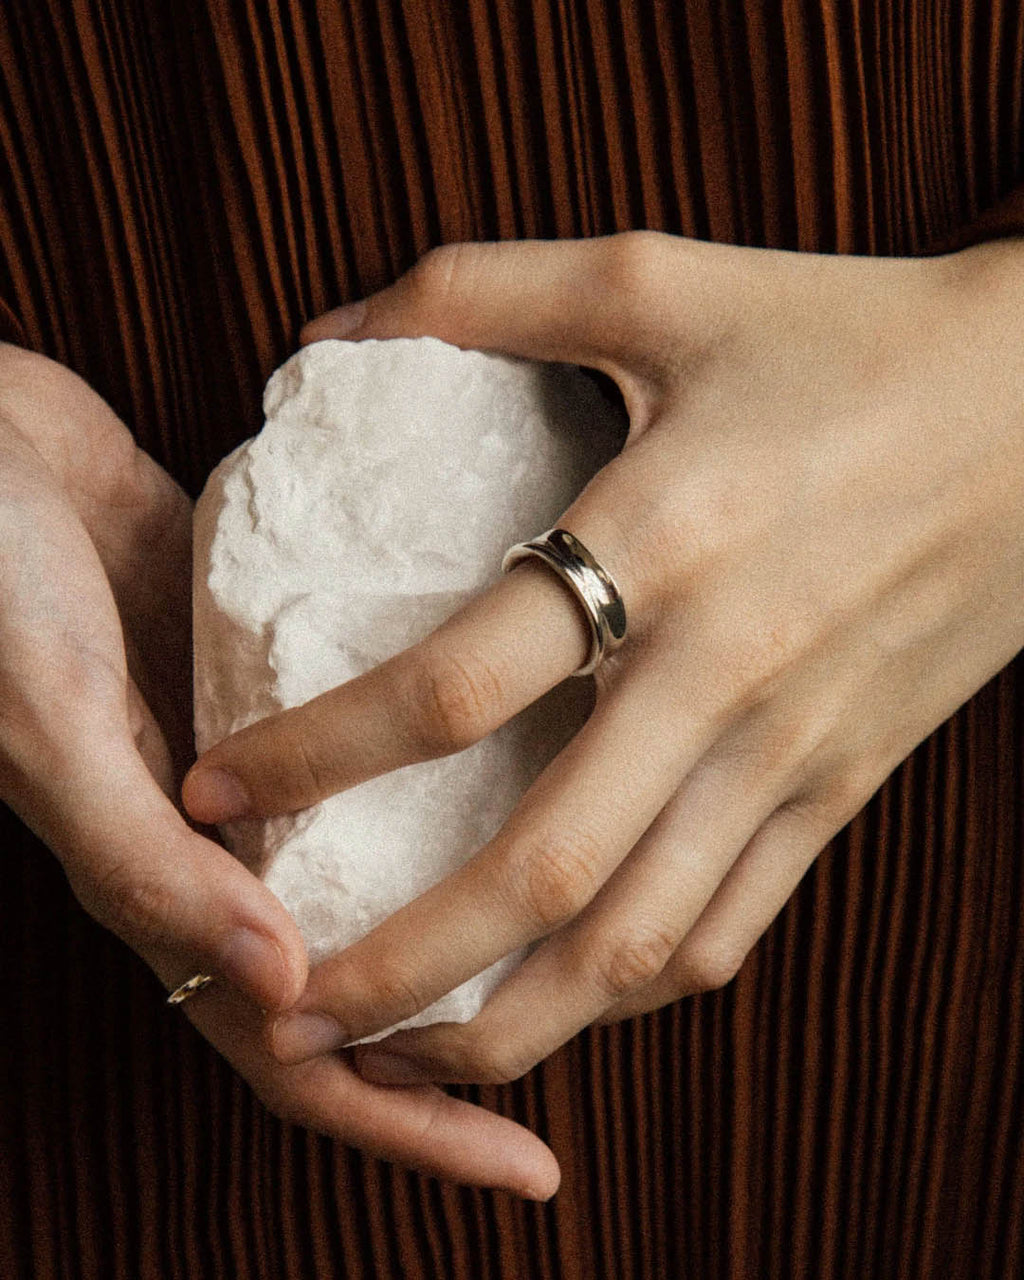 the squish ring is made from an organic shape that looks different from every angle